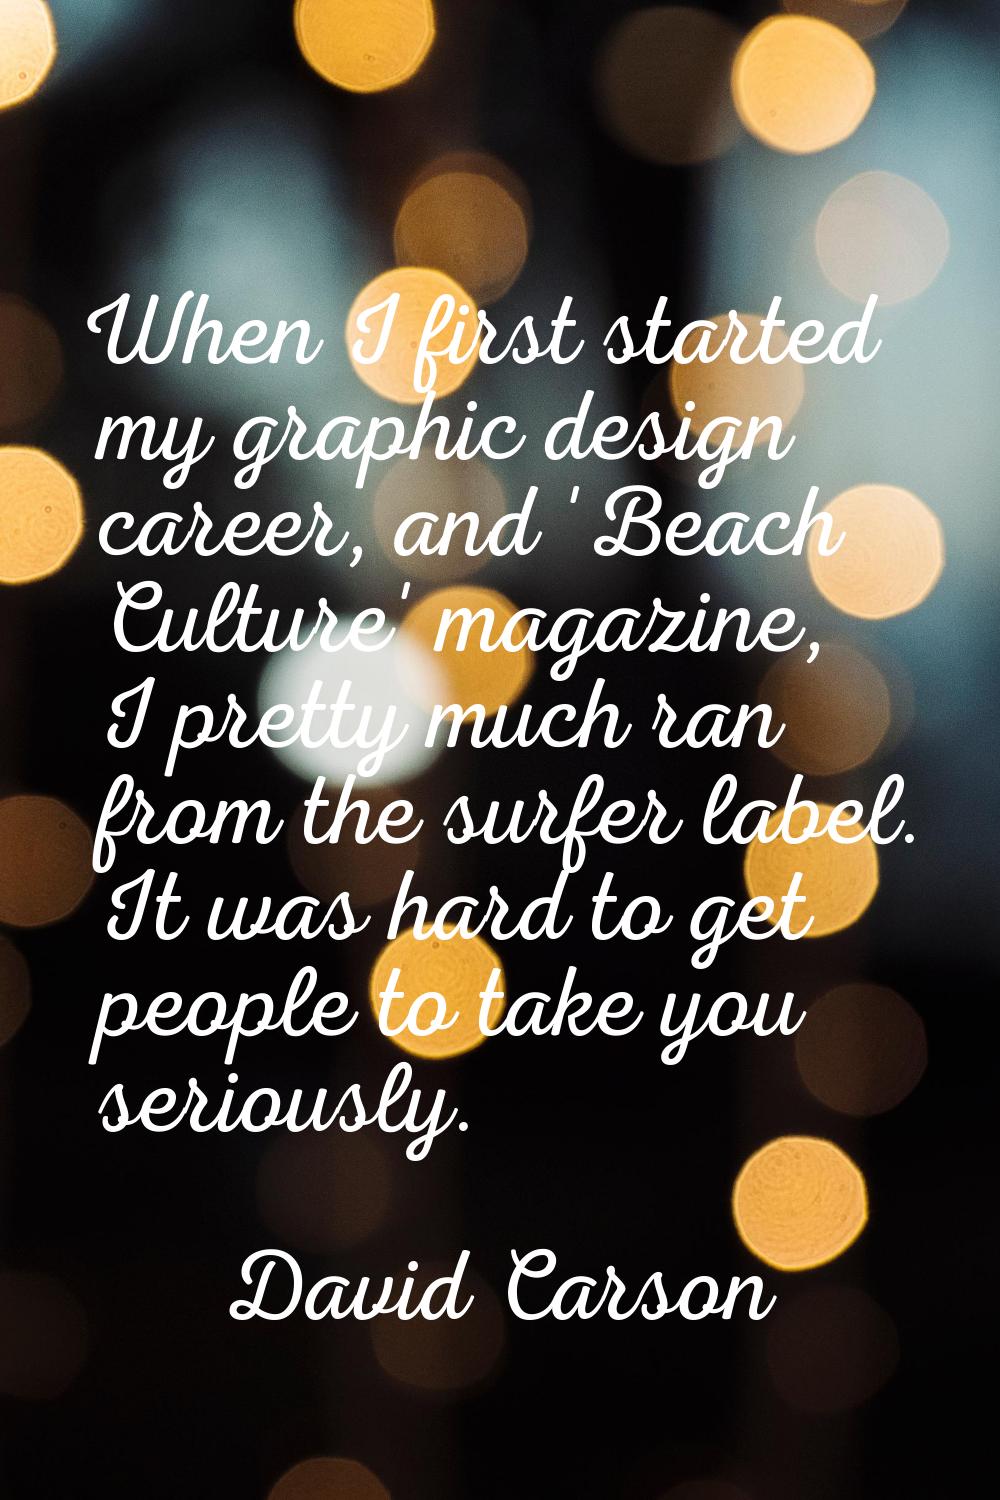 When I first started my graphic design career, and 'Beach Culture' magazine, I pretty much ran from